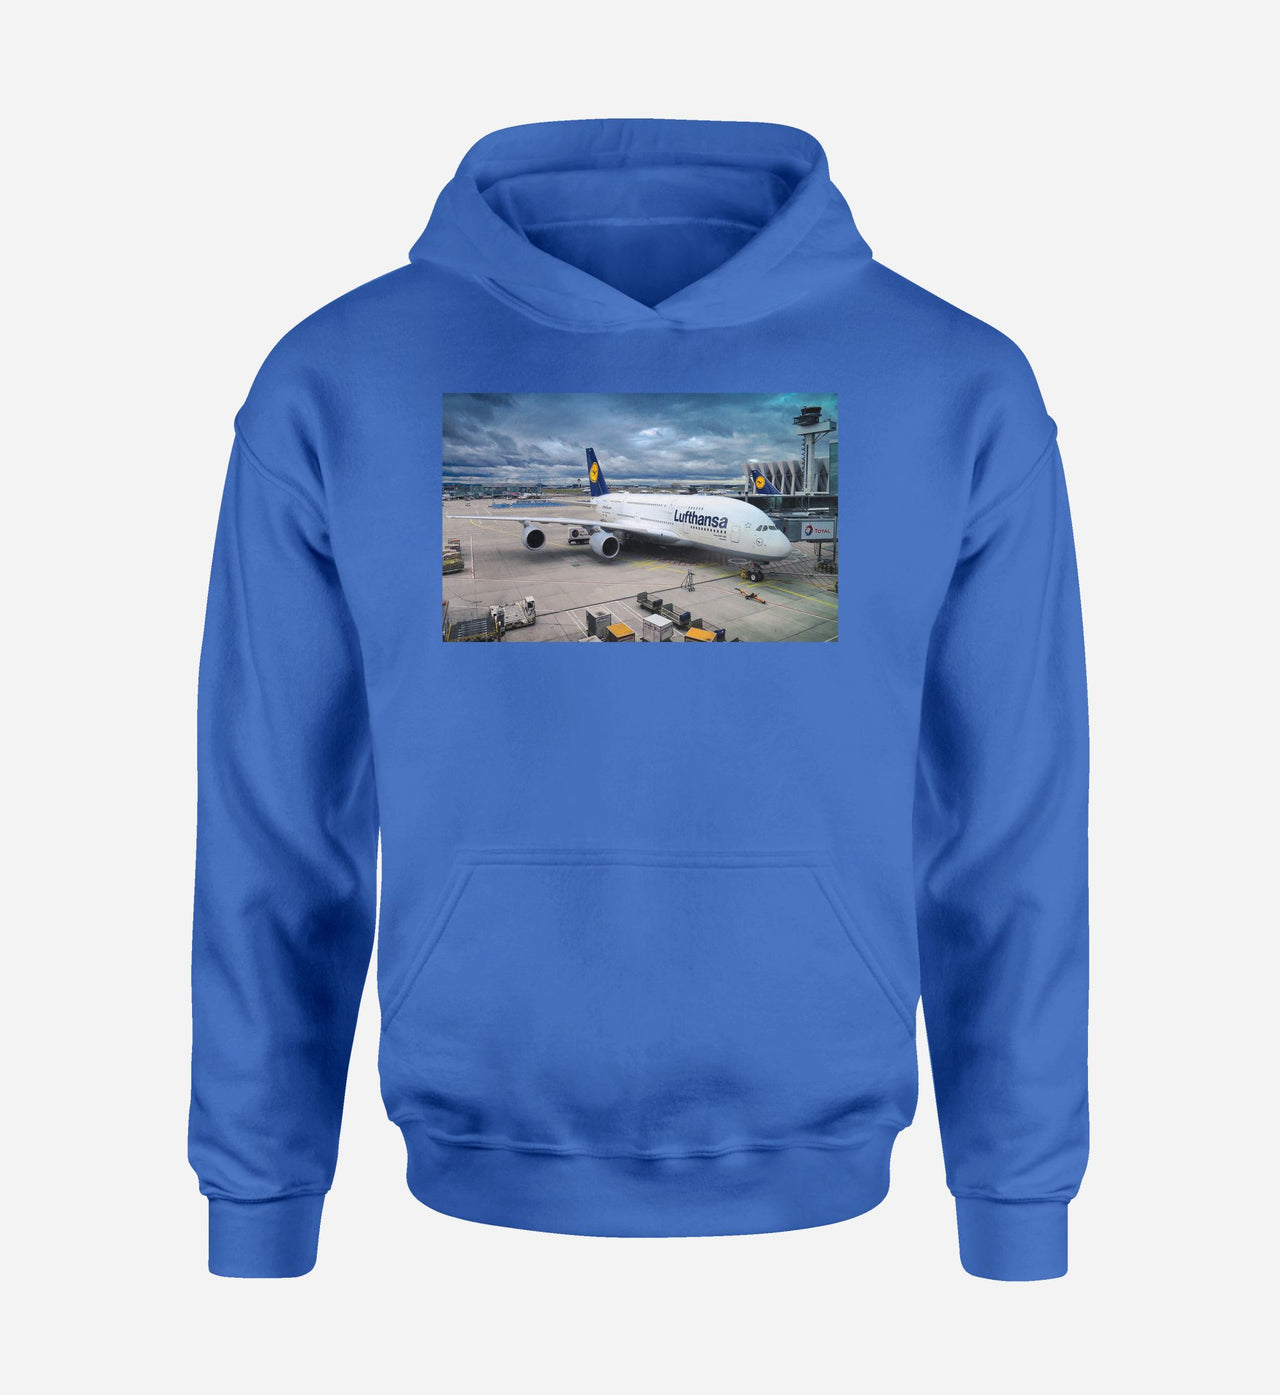 Lufthansa's A380 At The Gate Designed Hoodies